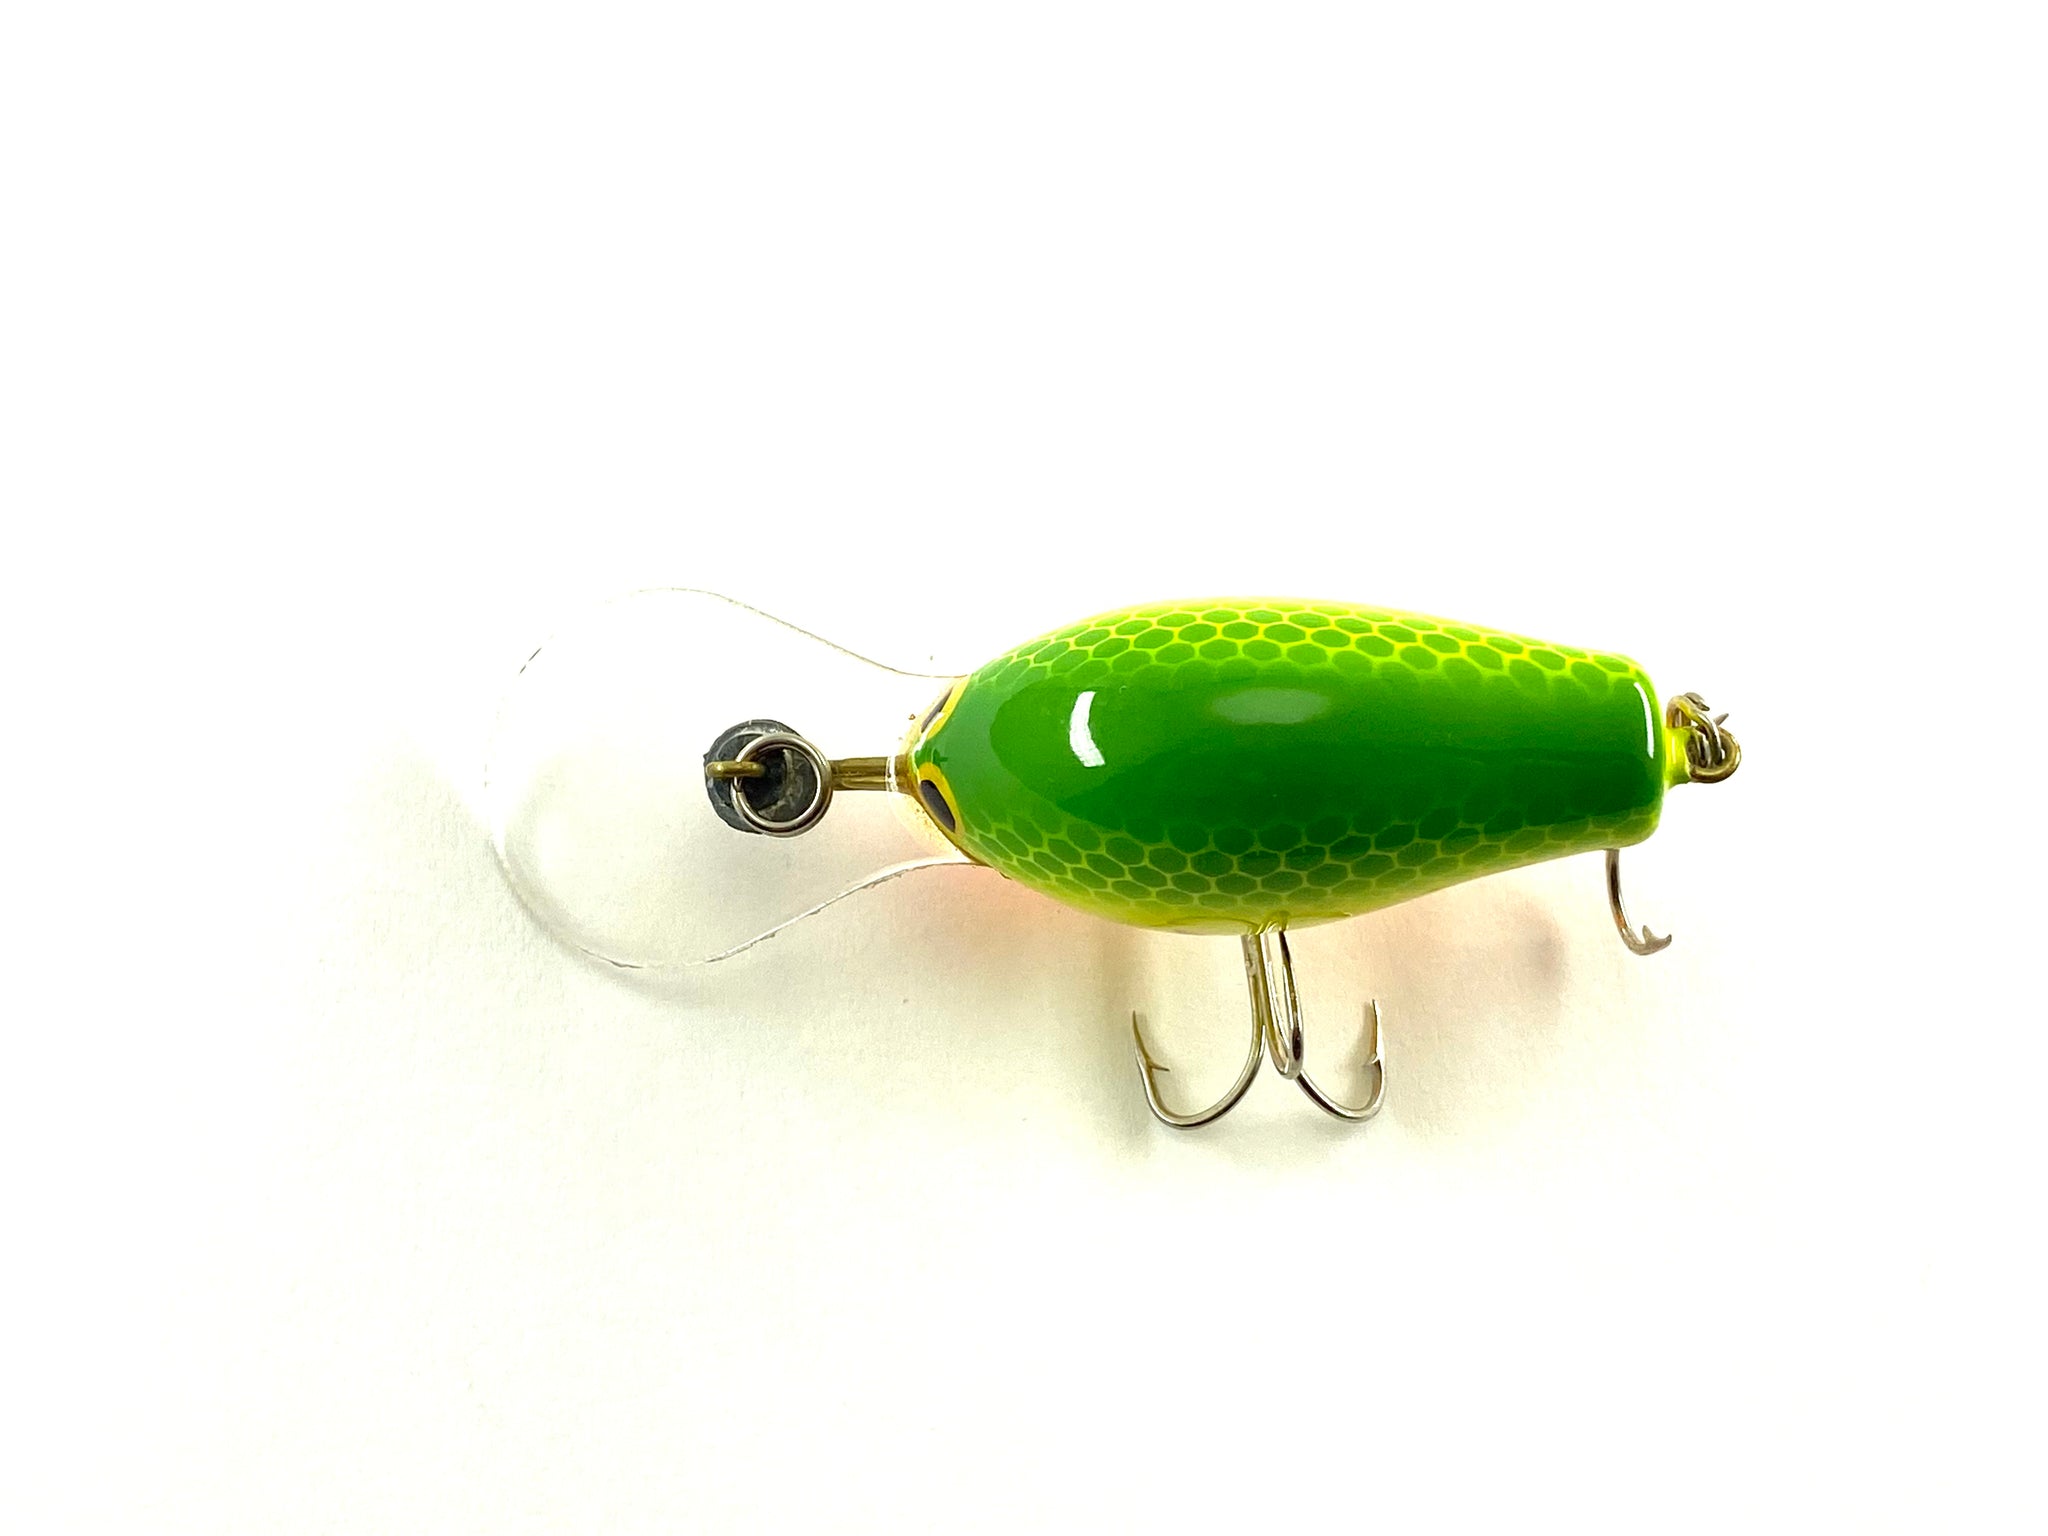 BAGLEY BAIT CO DB-1 Brass Fishing Lure • GREEN on CHARTREUSE